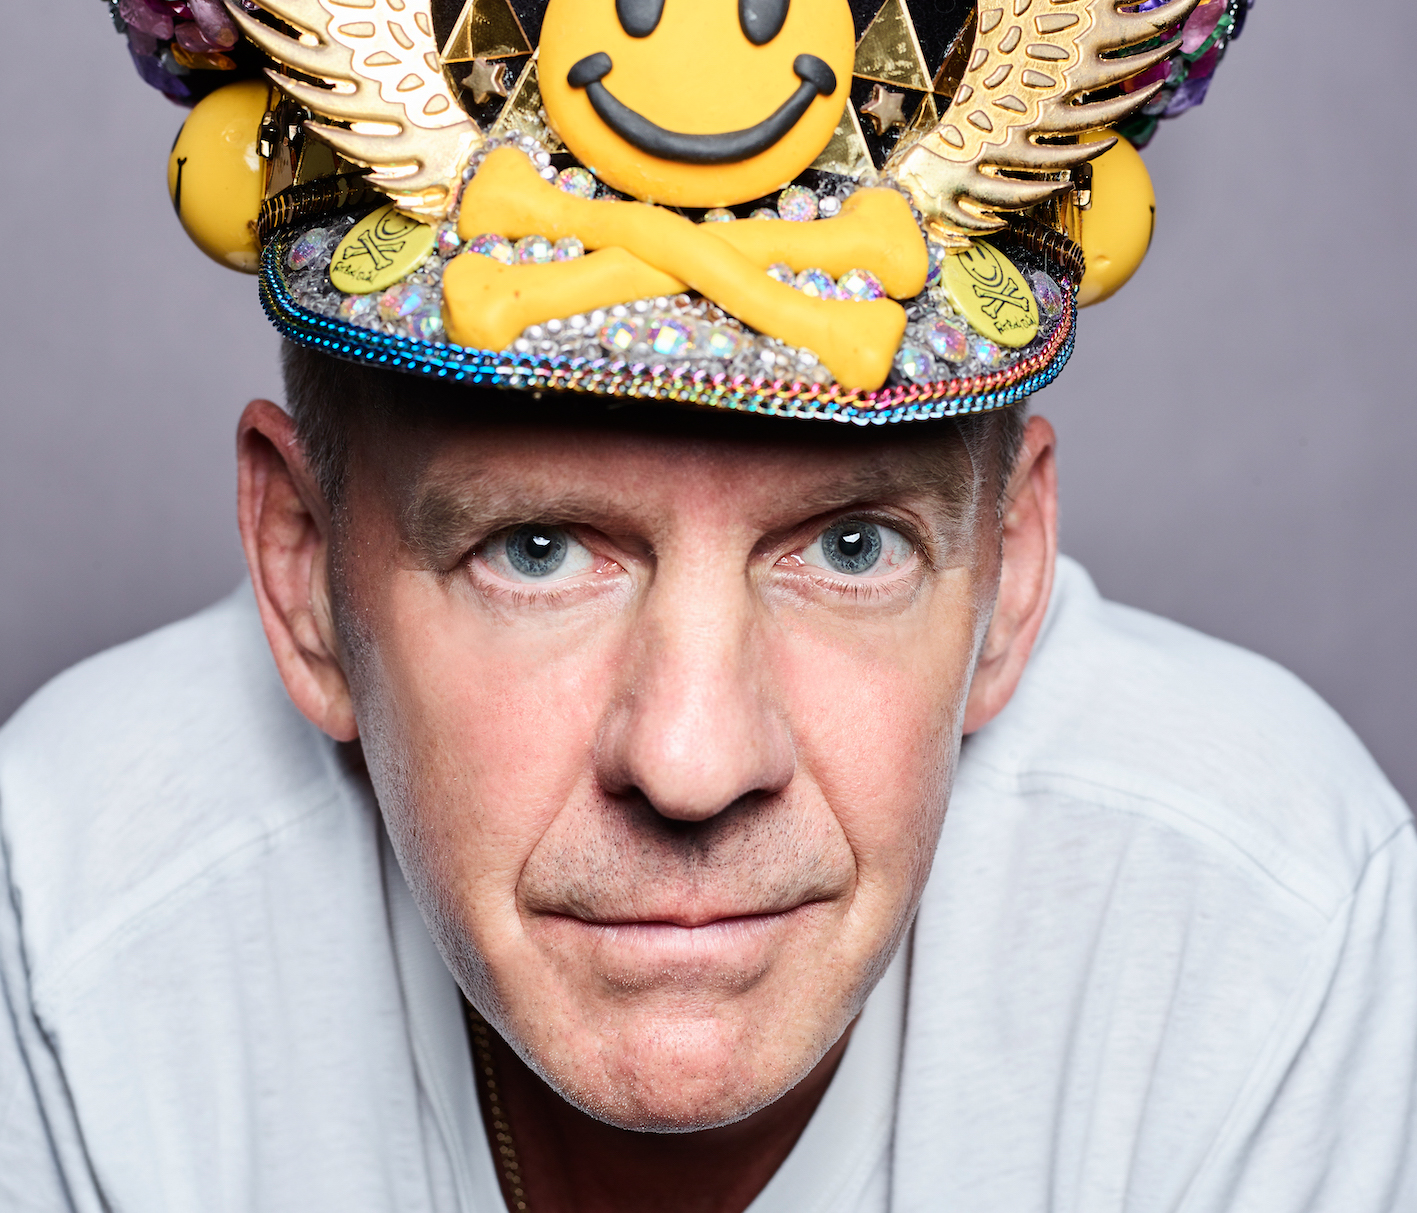 FATBOY SLIM announces headline show at SSE ARENA, Belfast on 18th March 2022 1